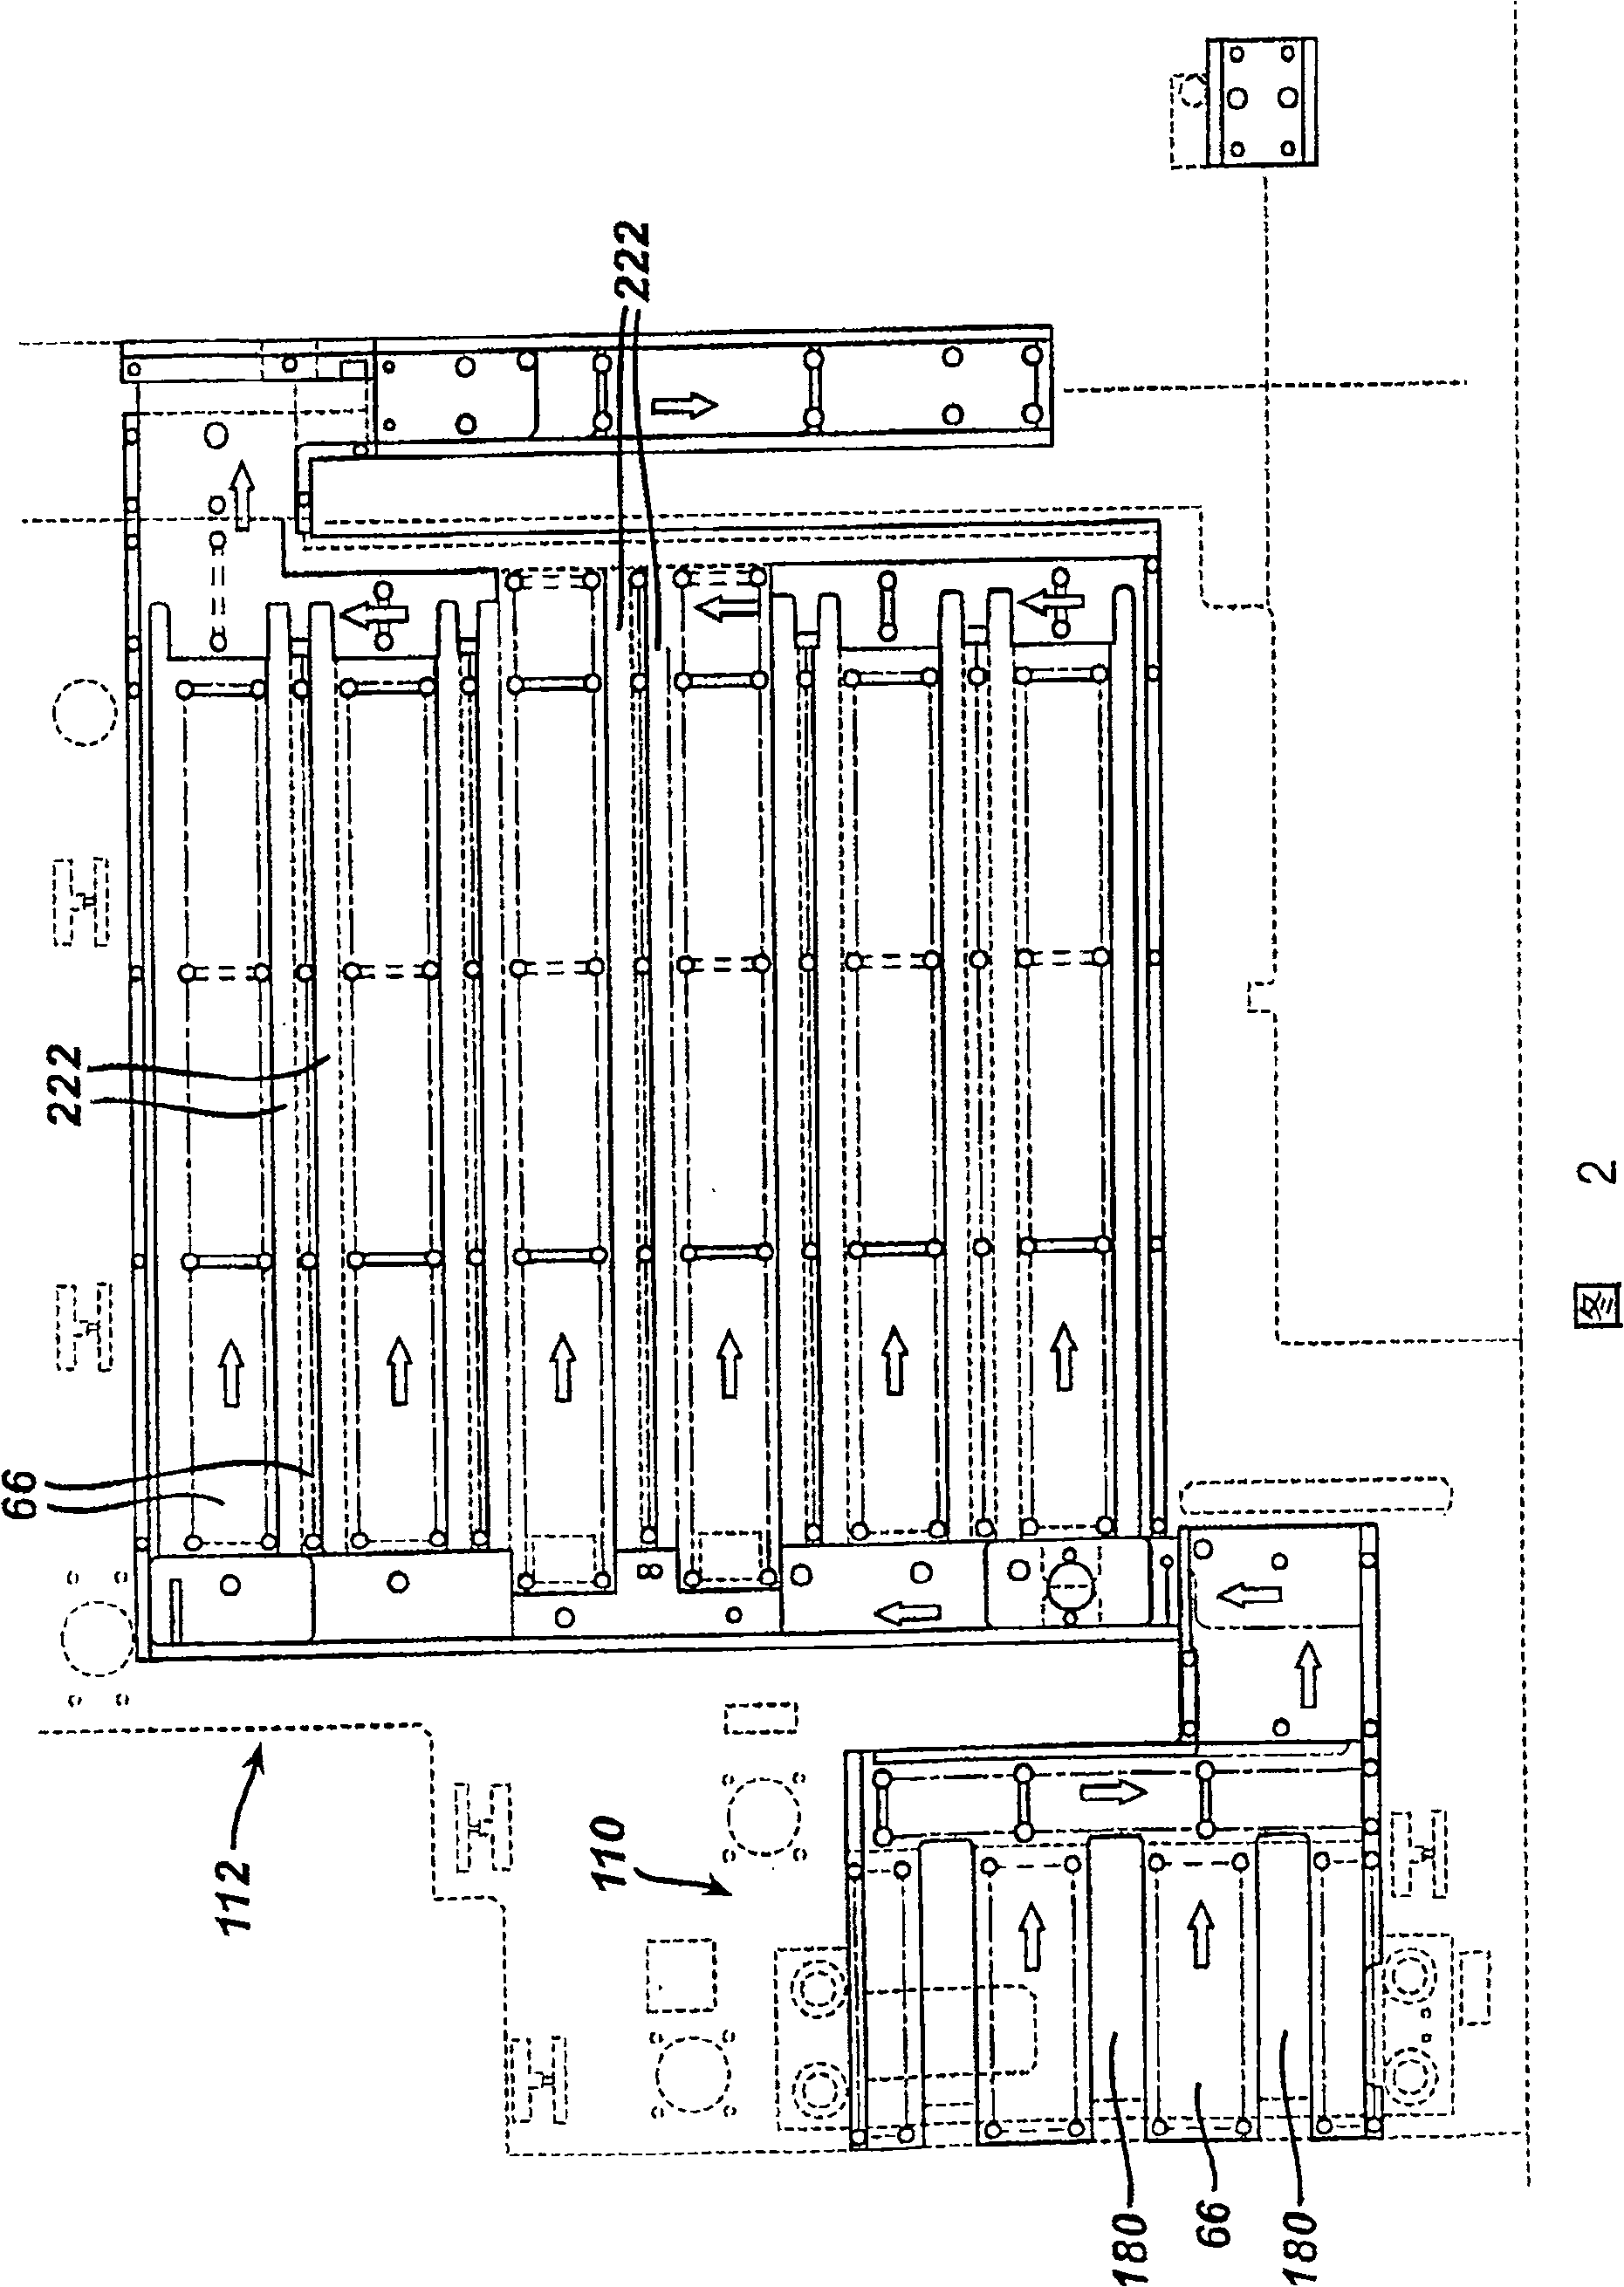 Apparatus and method for handling lens carriers